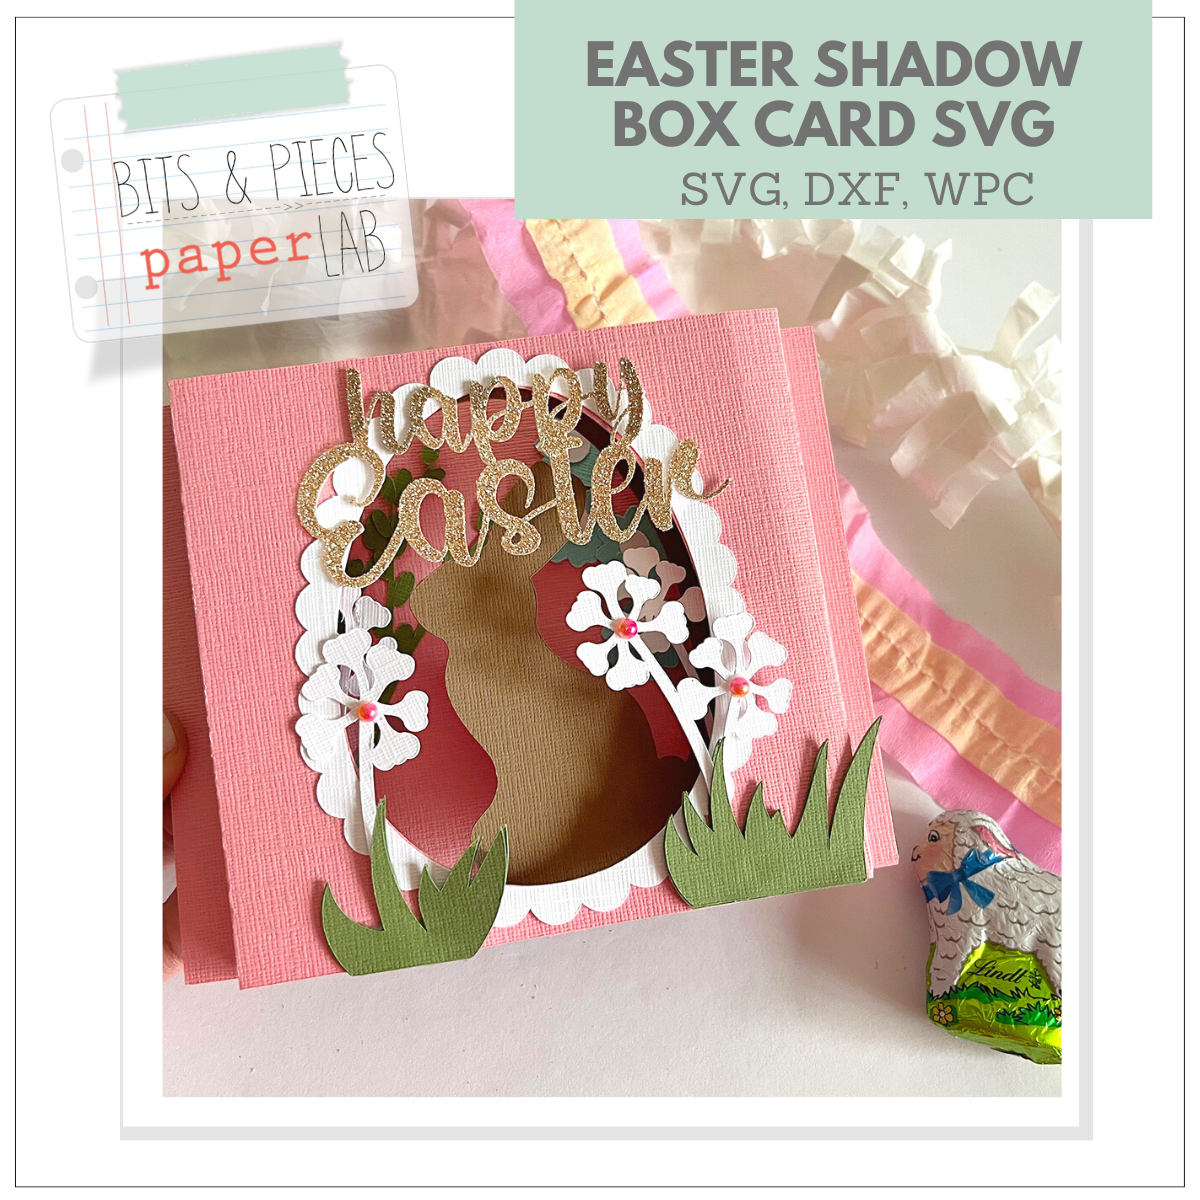 SVG file for Easter Card - Shadow Box Card SVG